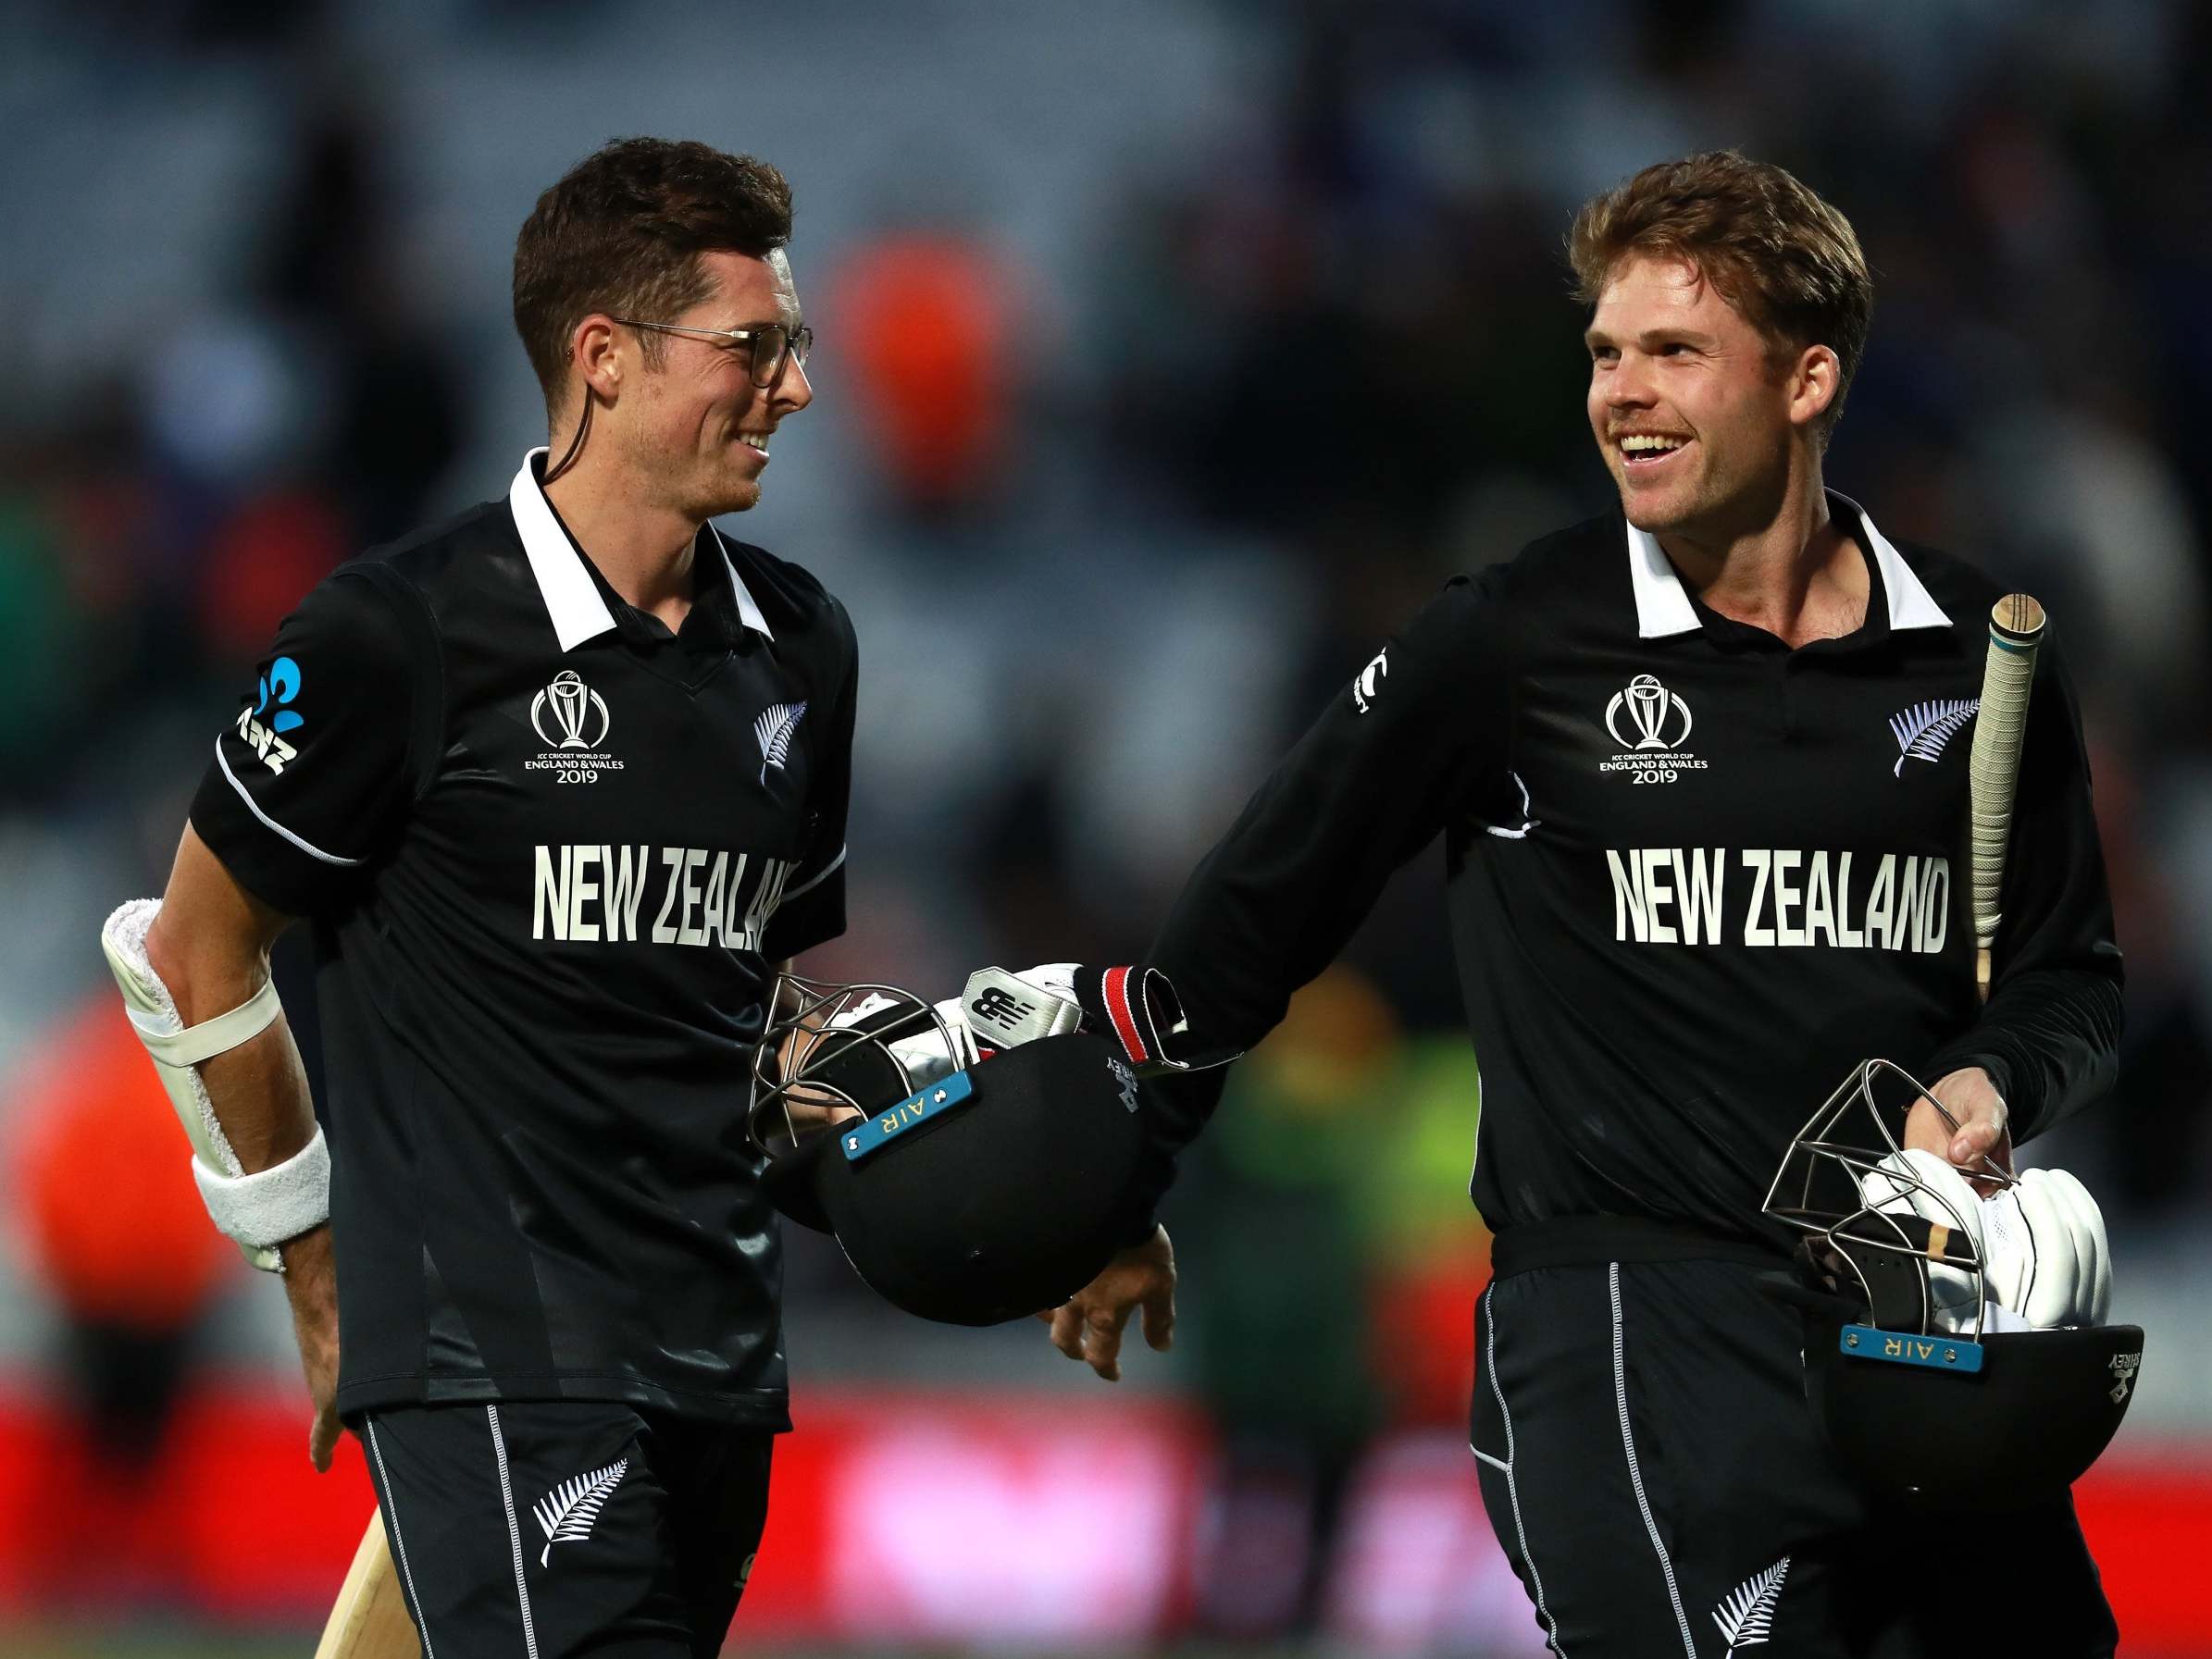 Cricket World Cup 2019: New Zealand hold nerve to secure dramatic victory against Bangladesh